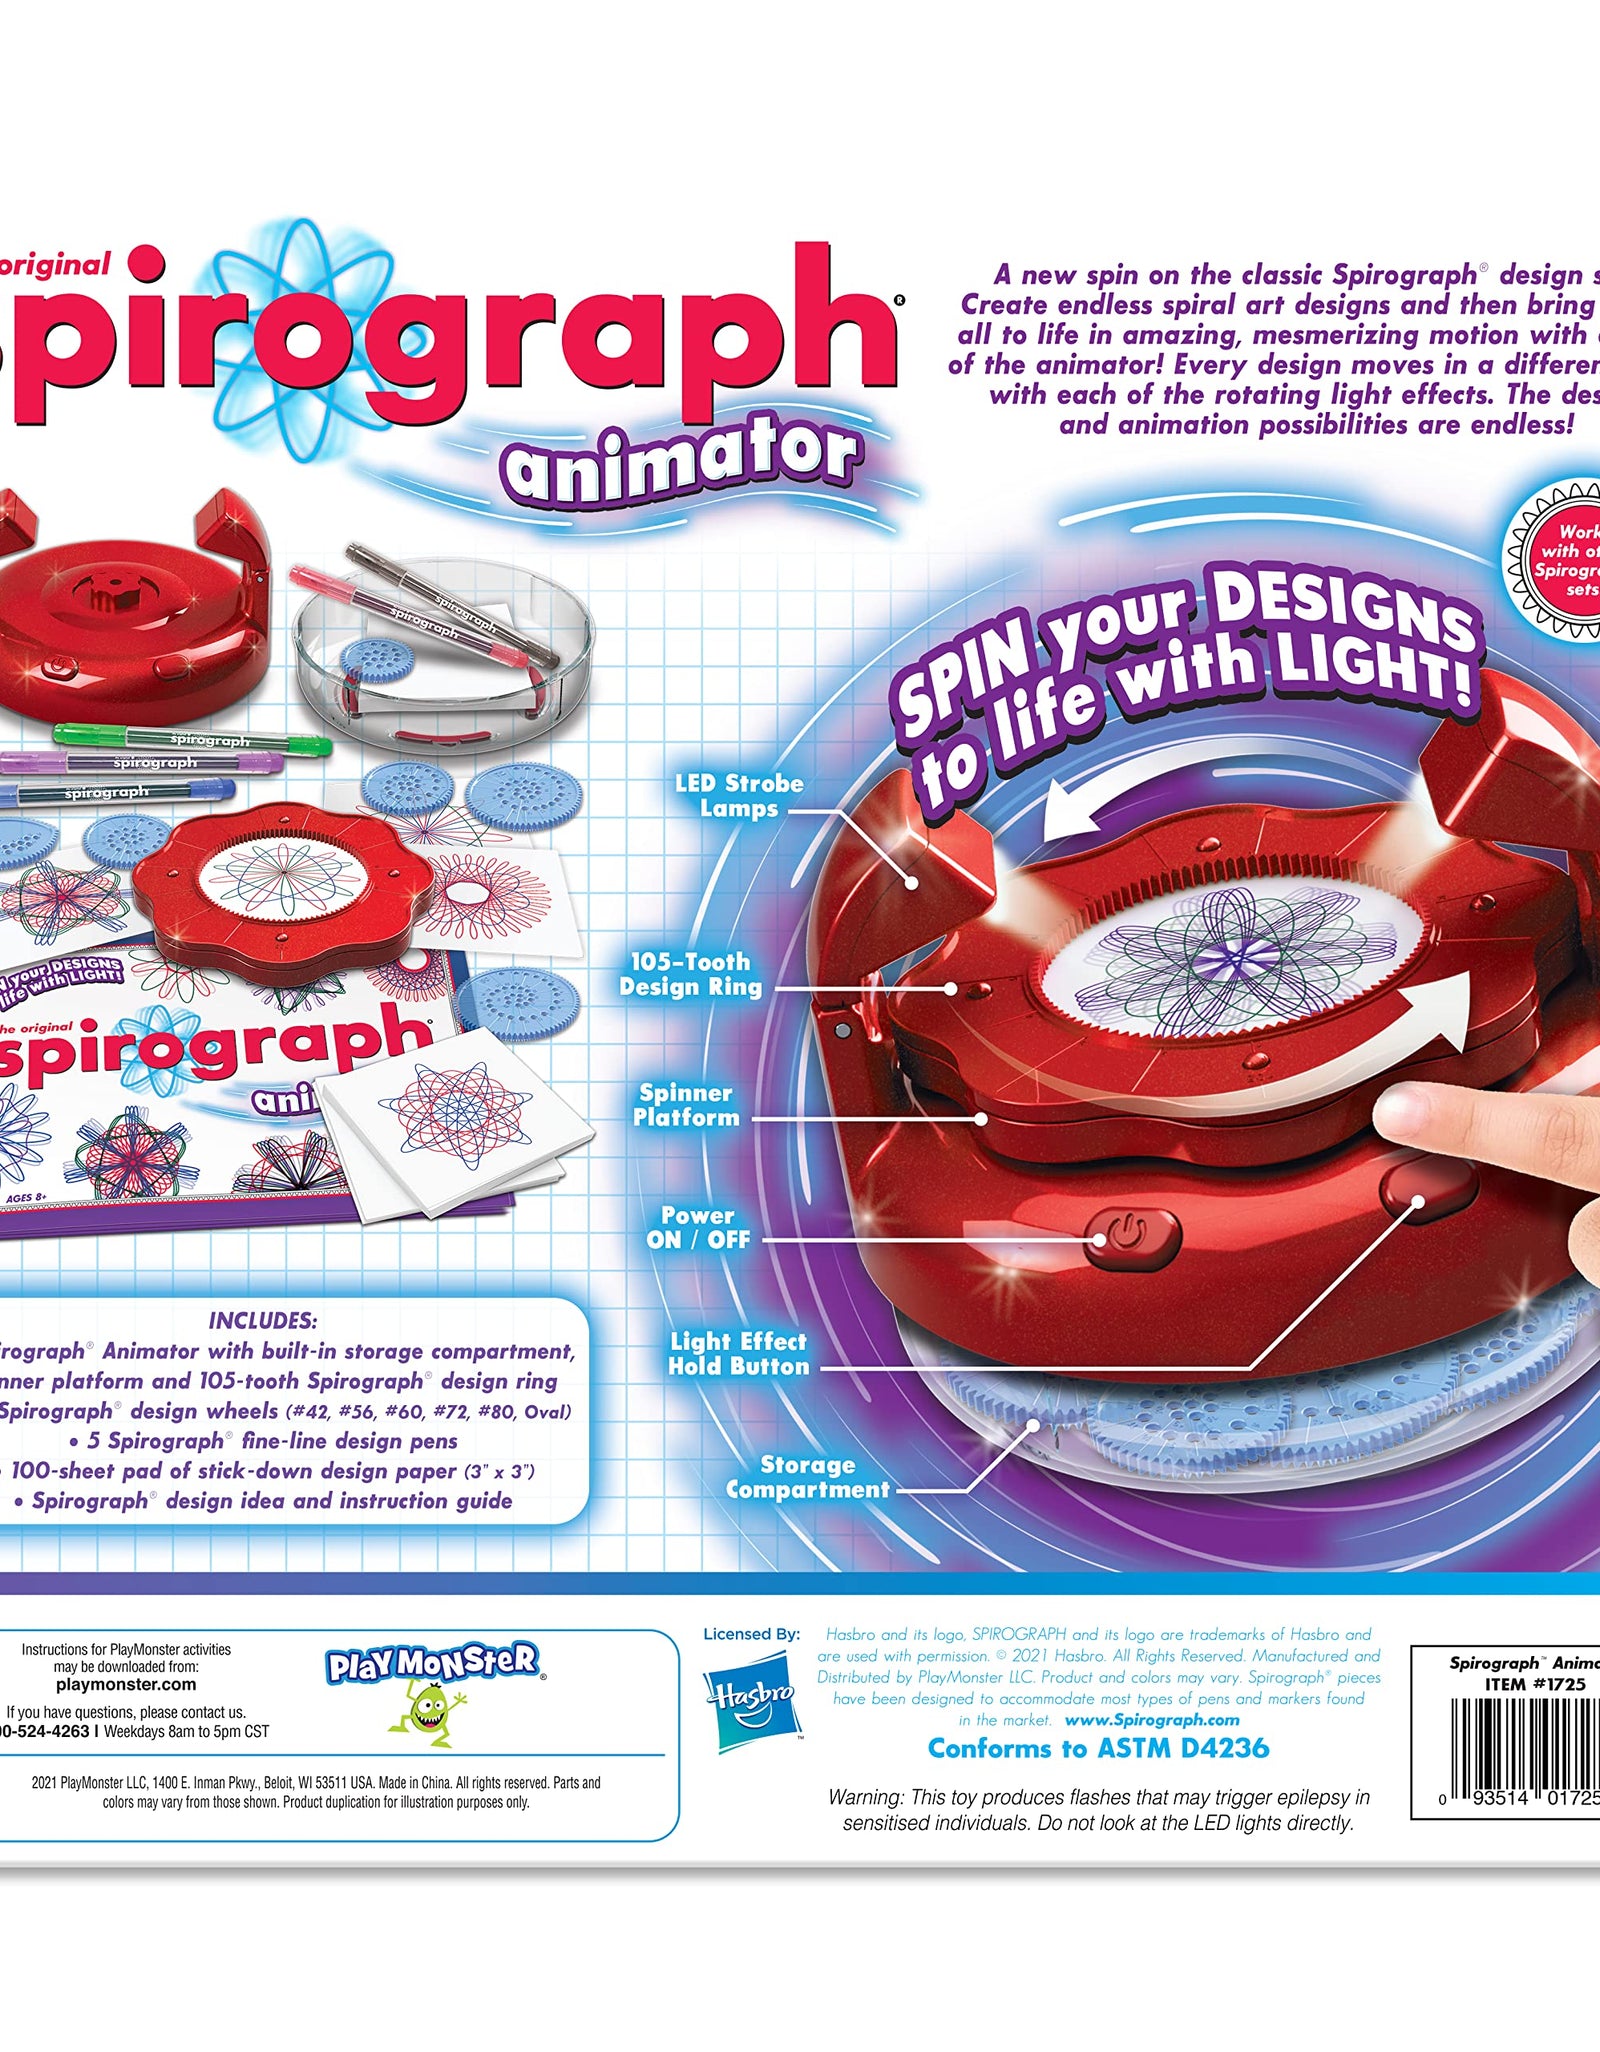 PlayMonster Spirograph -- Spirograph Animator -- The Classic Way to Make Countless Amazing Designs -- For Ages 8+